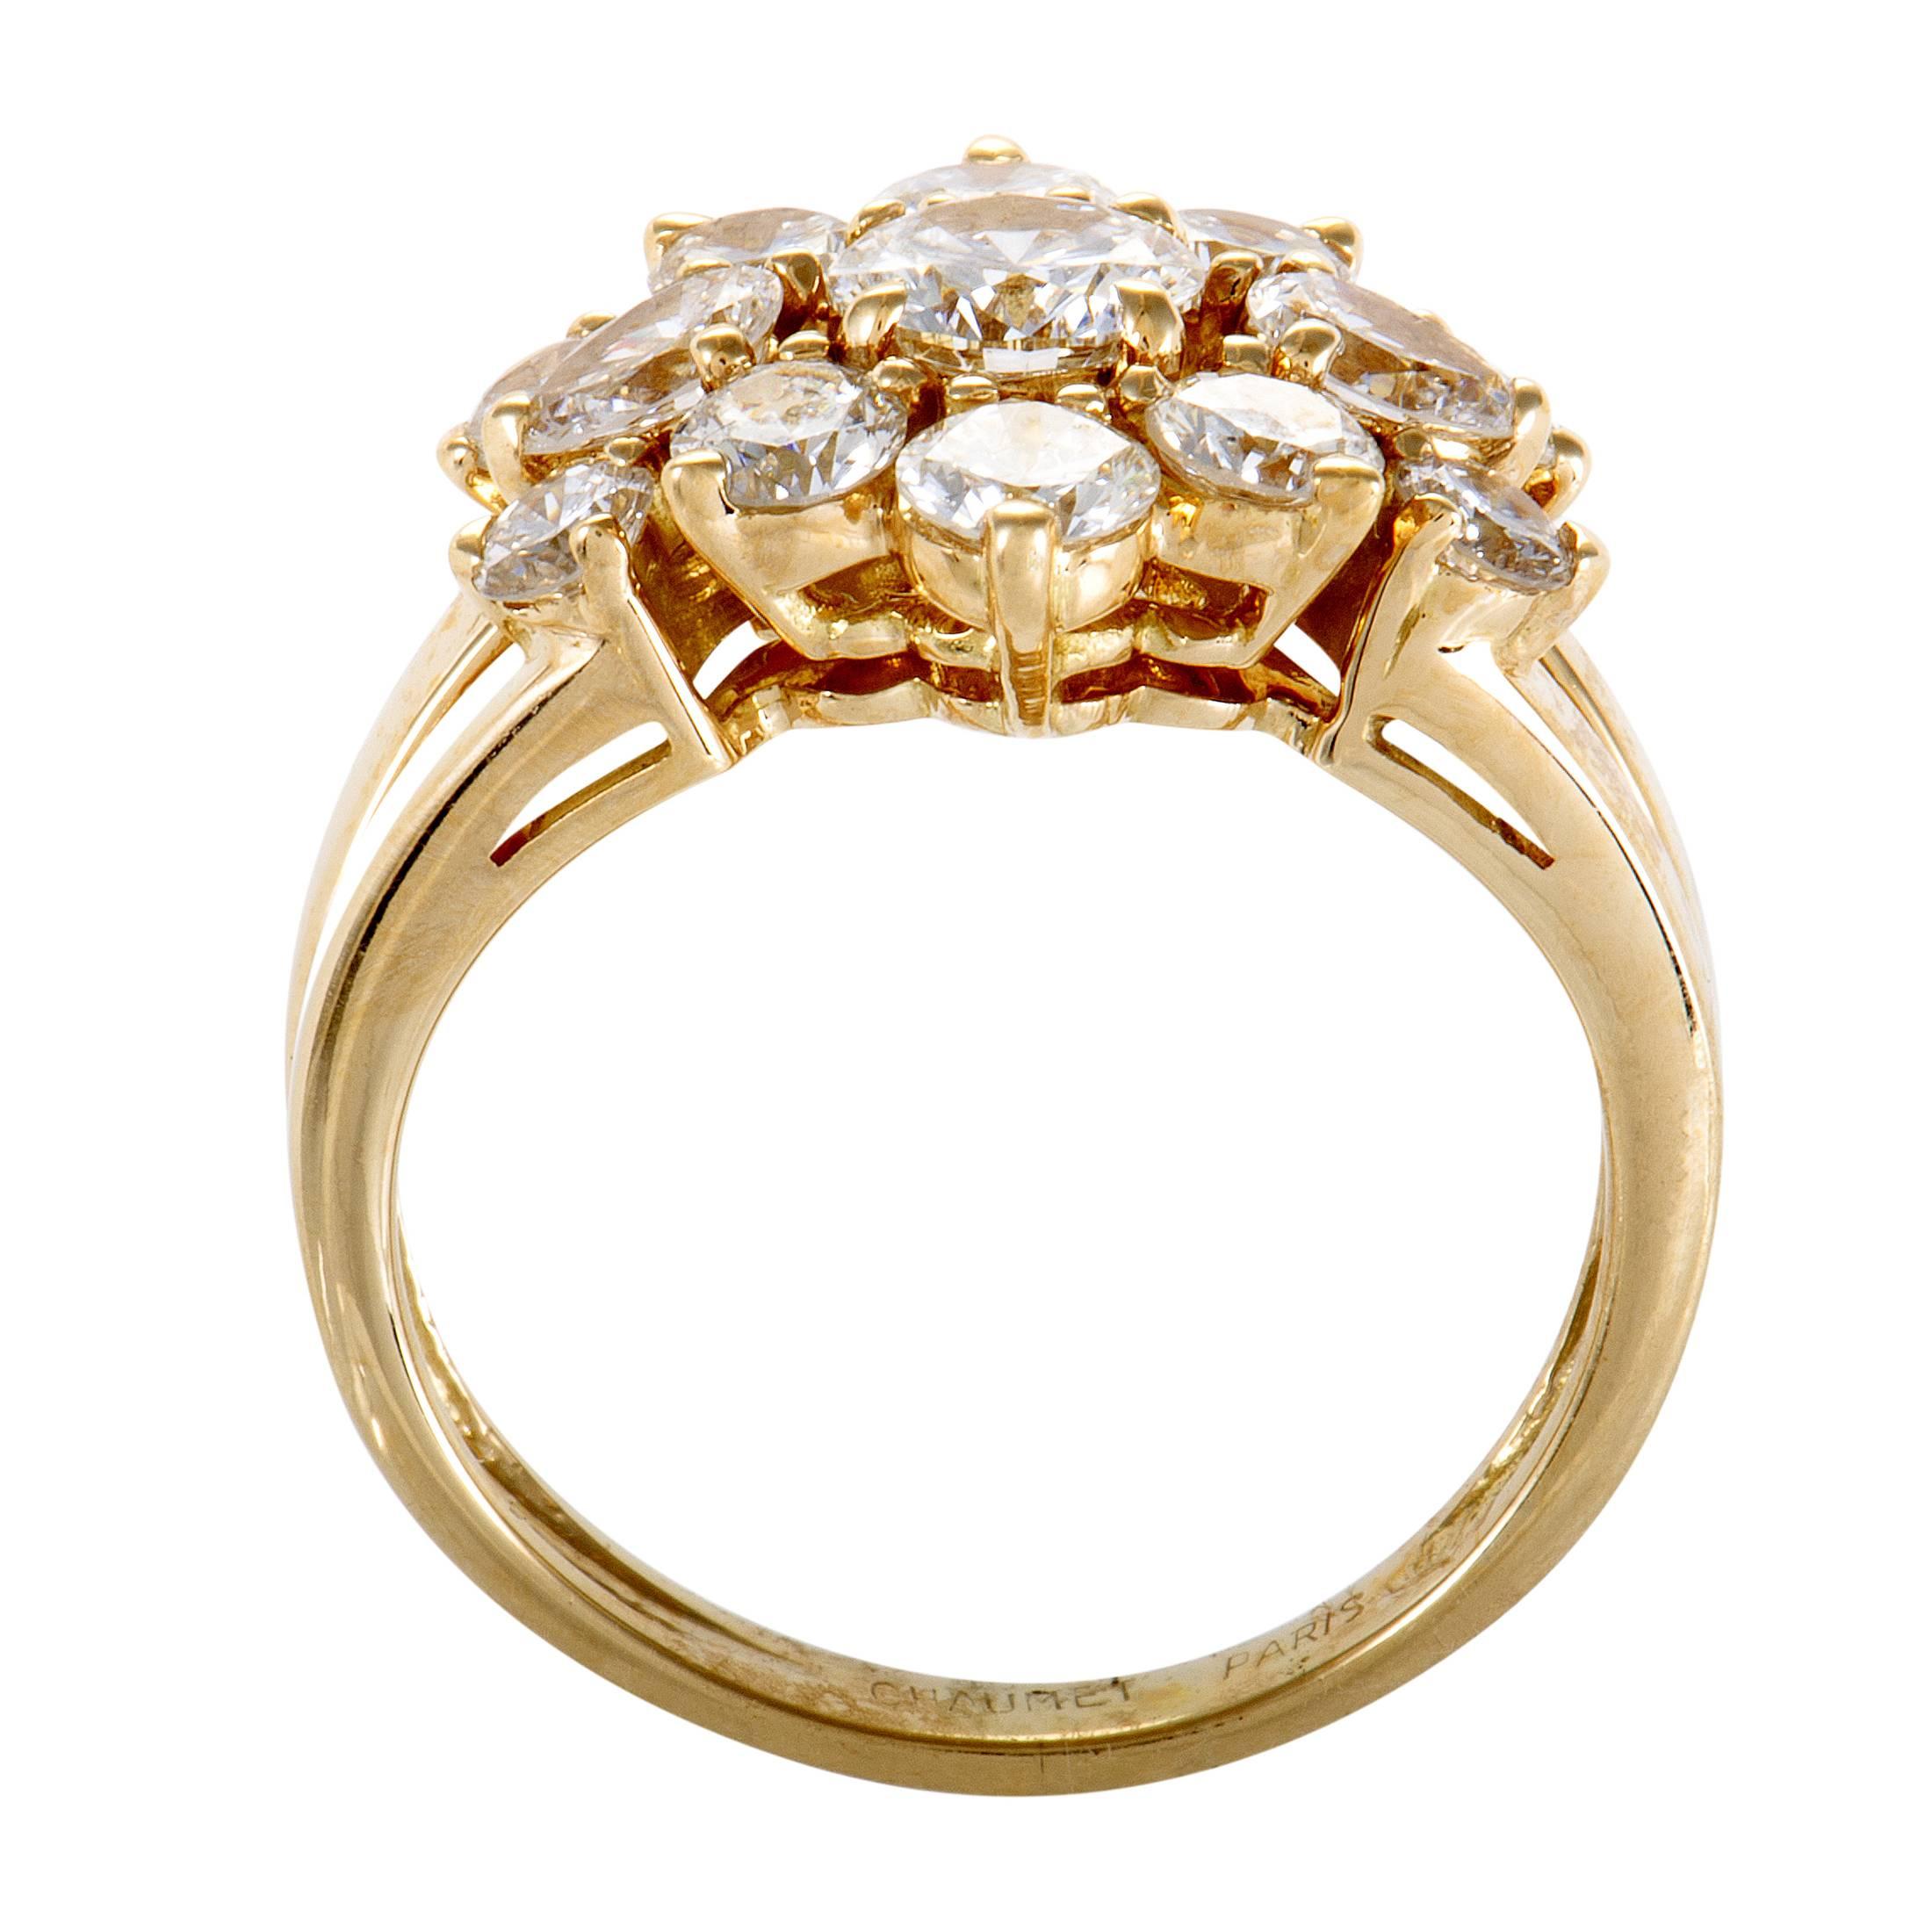 Tasteful, lavish and simply majestic, the fantastic arrangement of F-color diamonds of VS clarity weighing in total 2.10 carats gives this gorgeous 18K yellow gold ring from Chaumet an irresistible aura of radiant femininity and resplendent beauty.